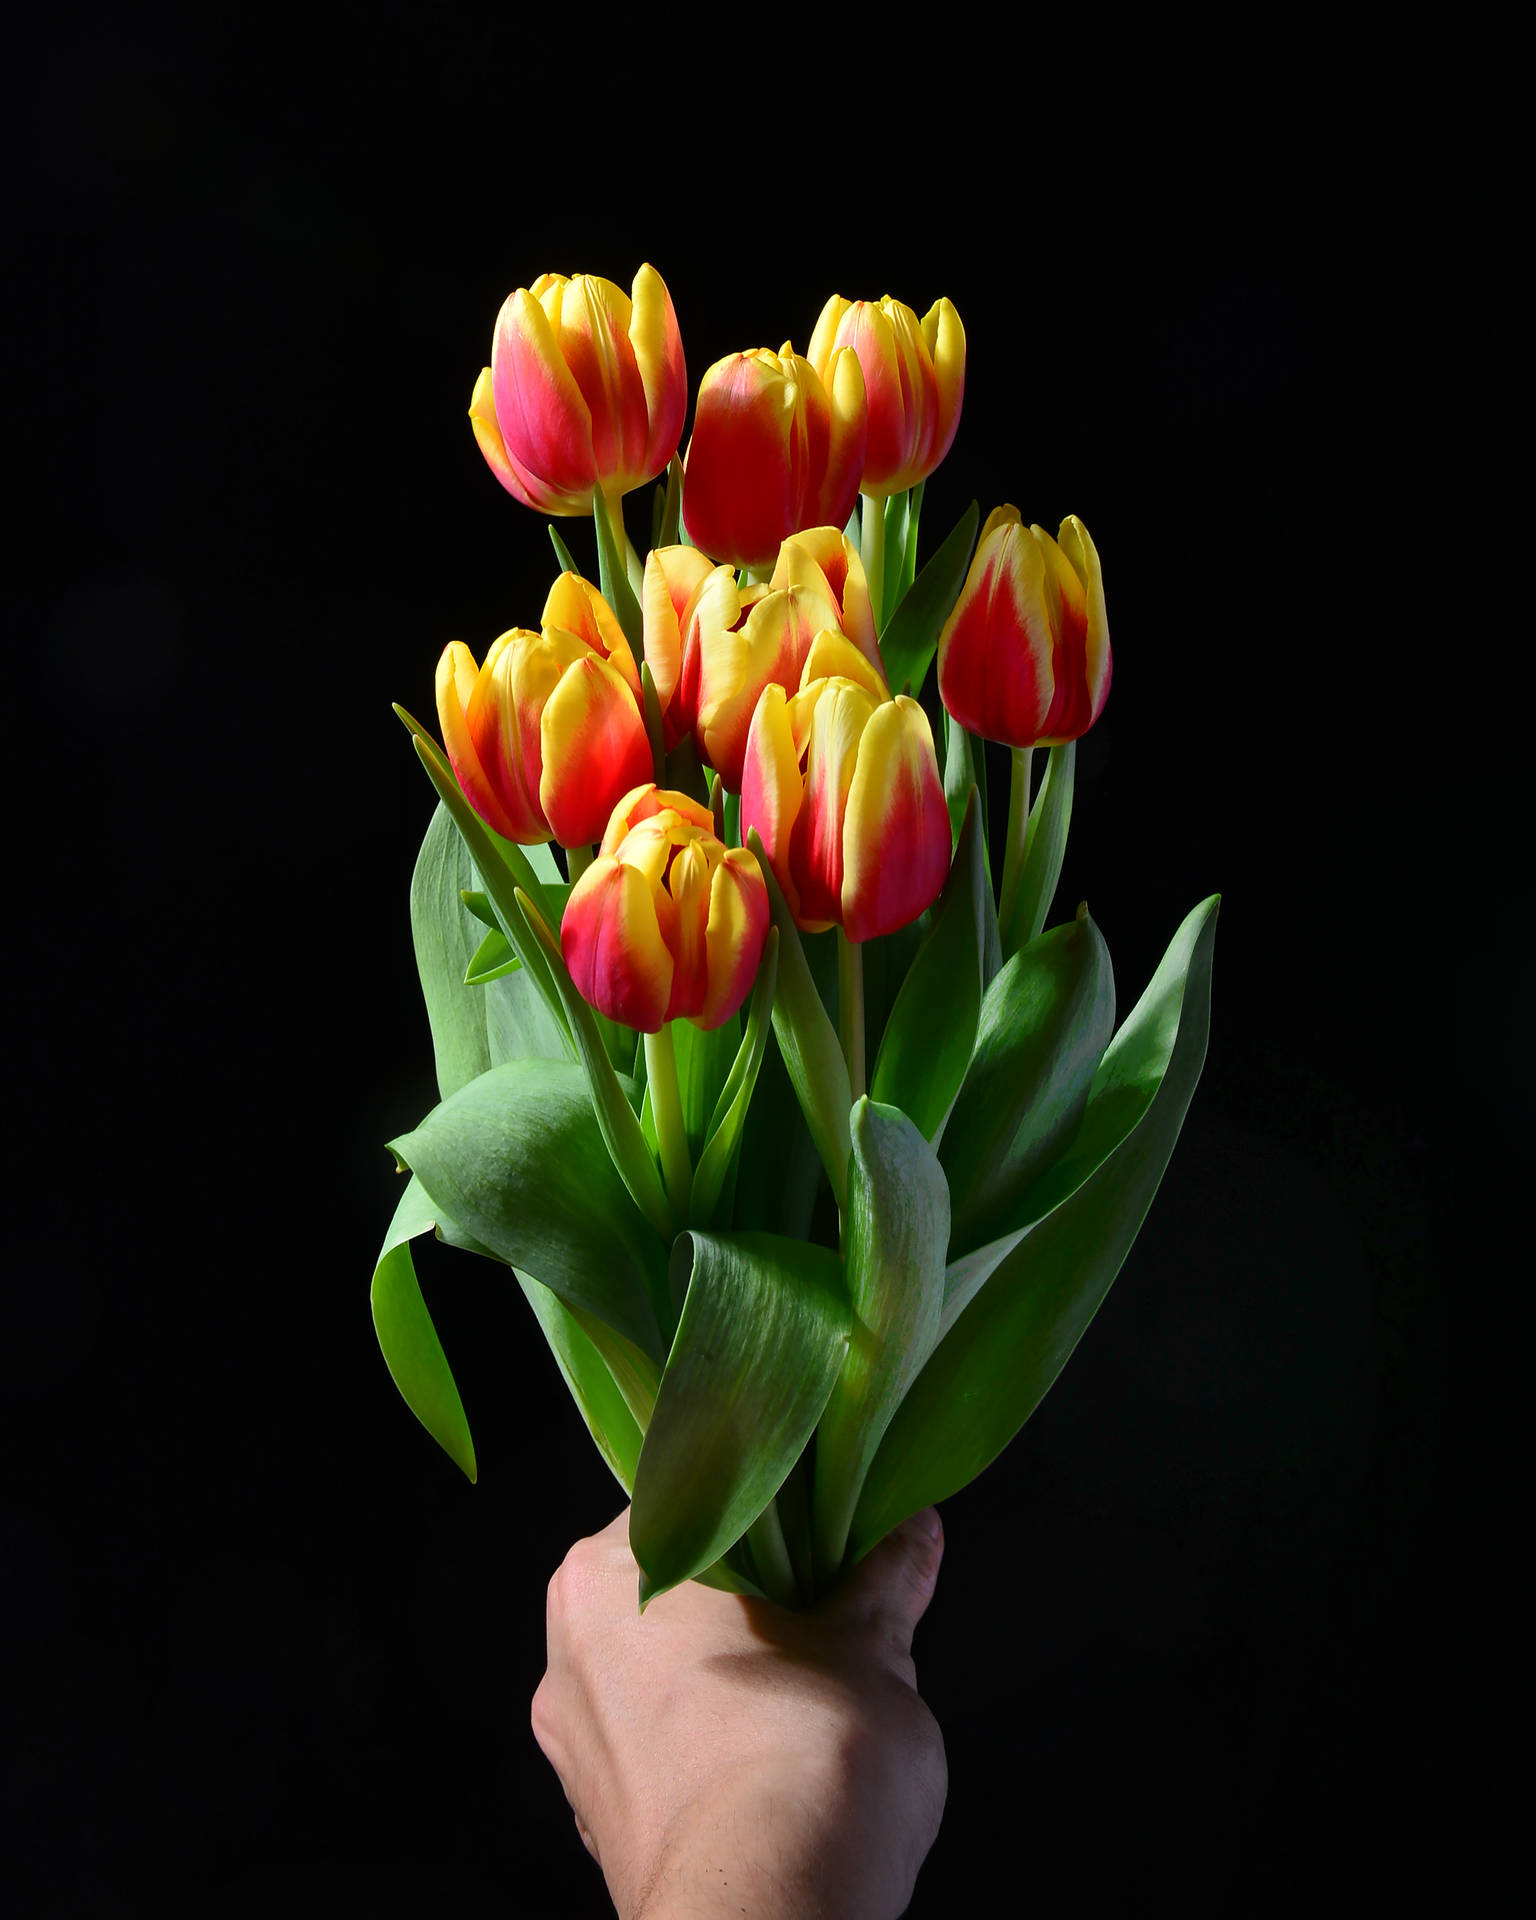 Tulip 3206X4007 Wallpaper and Background Image